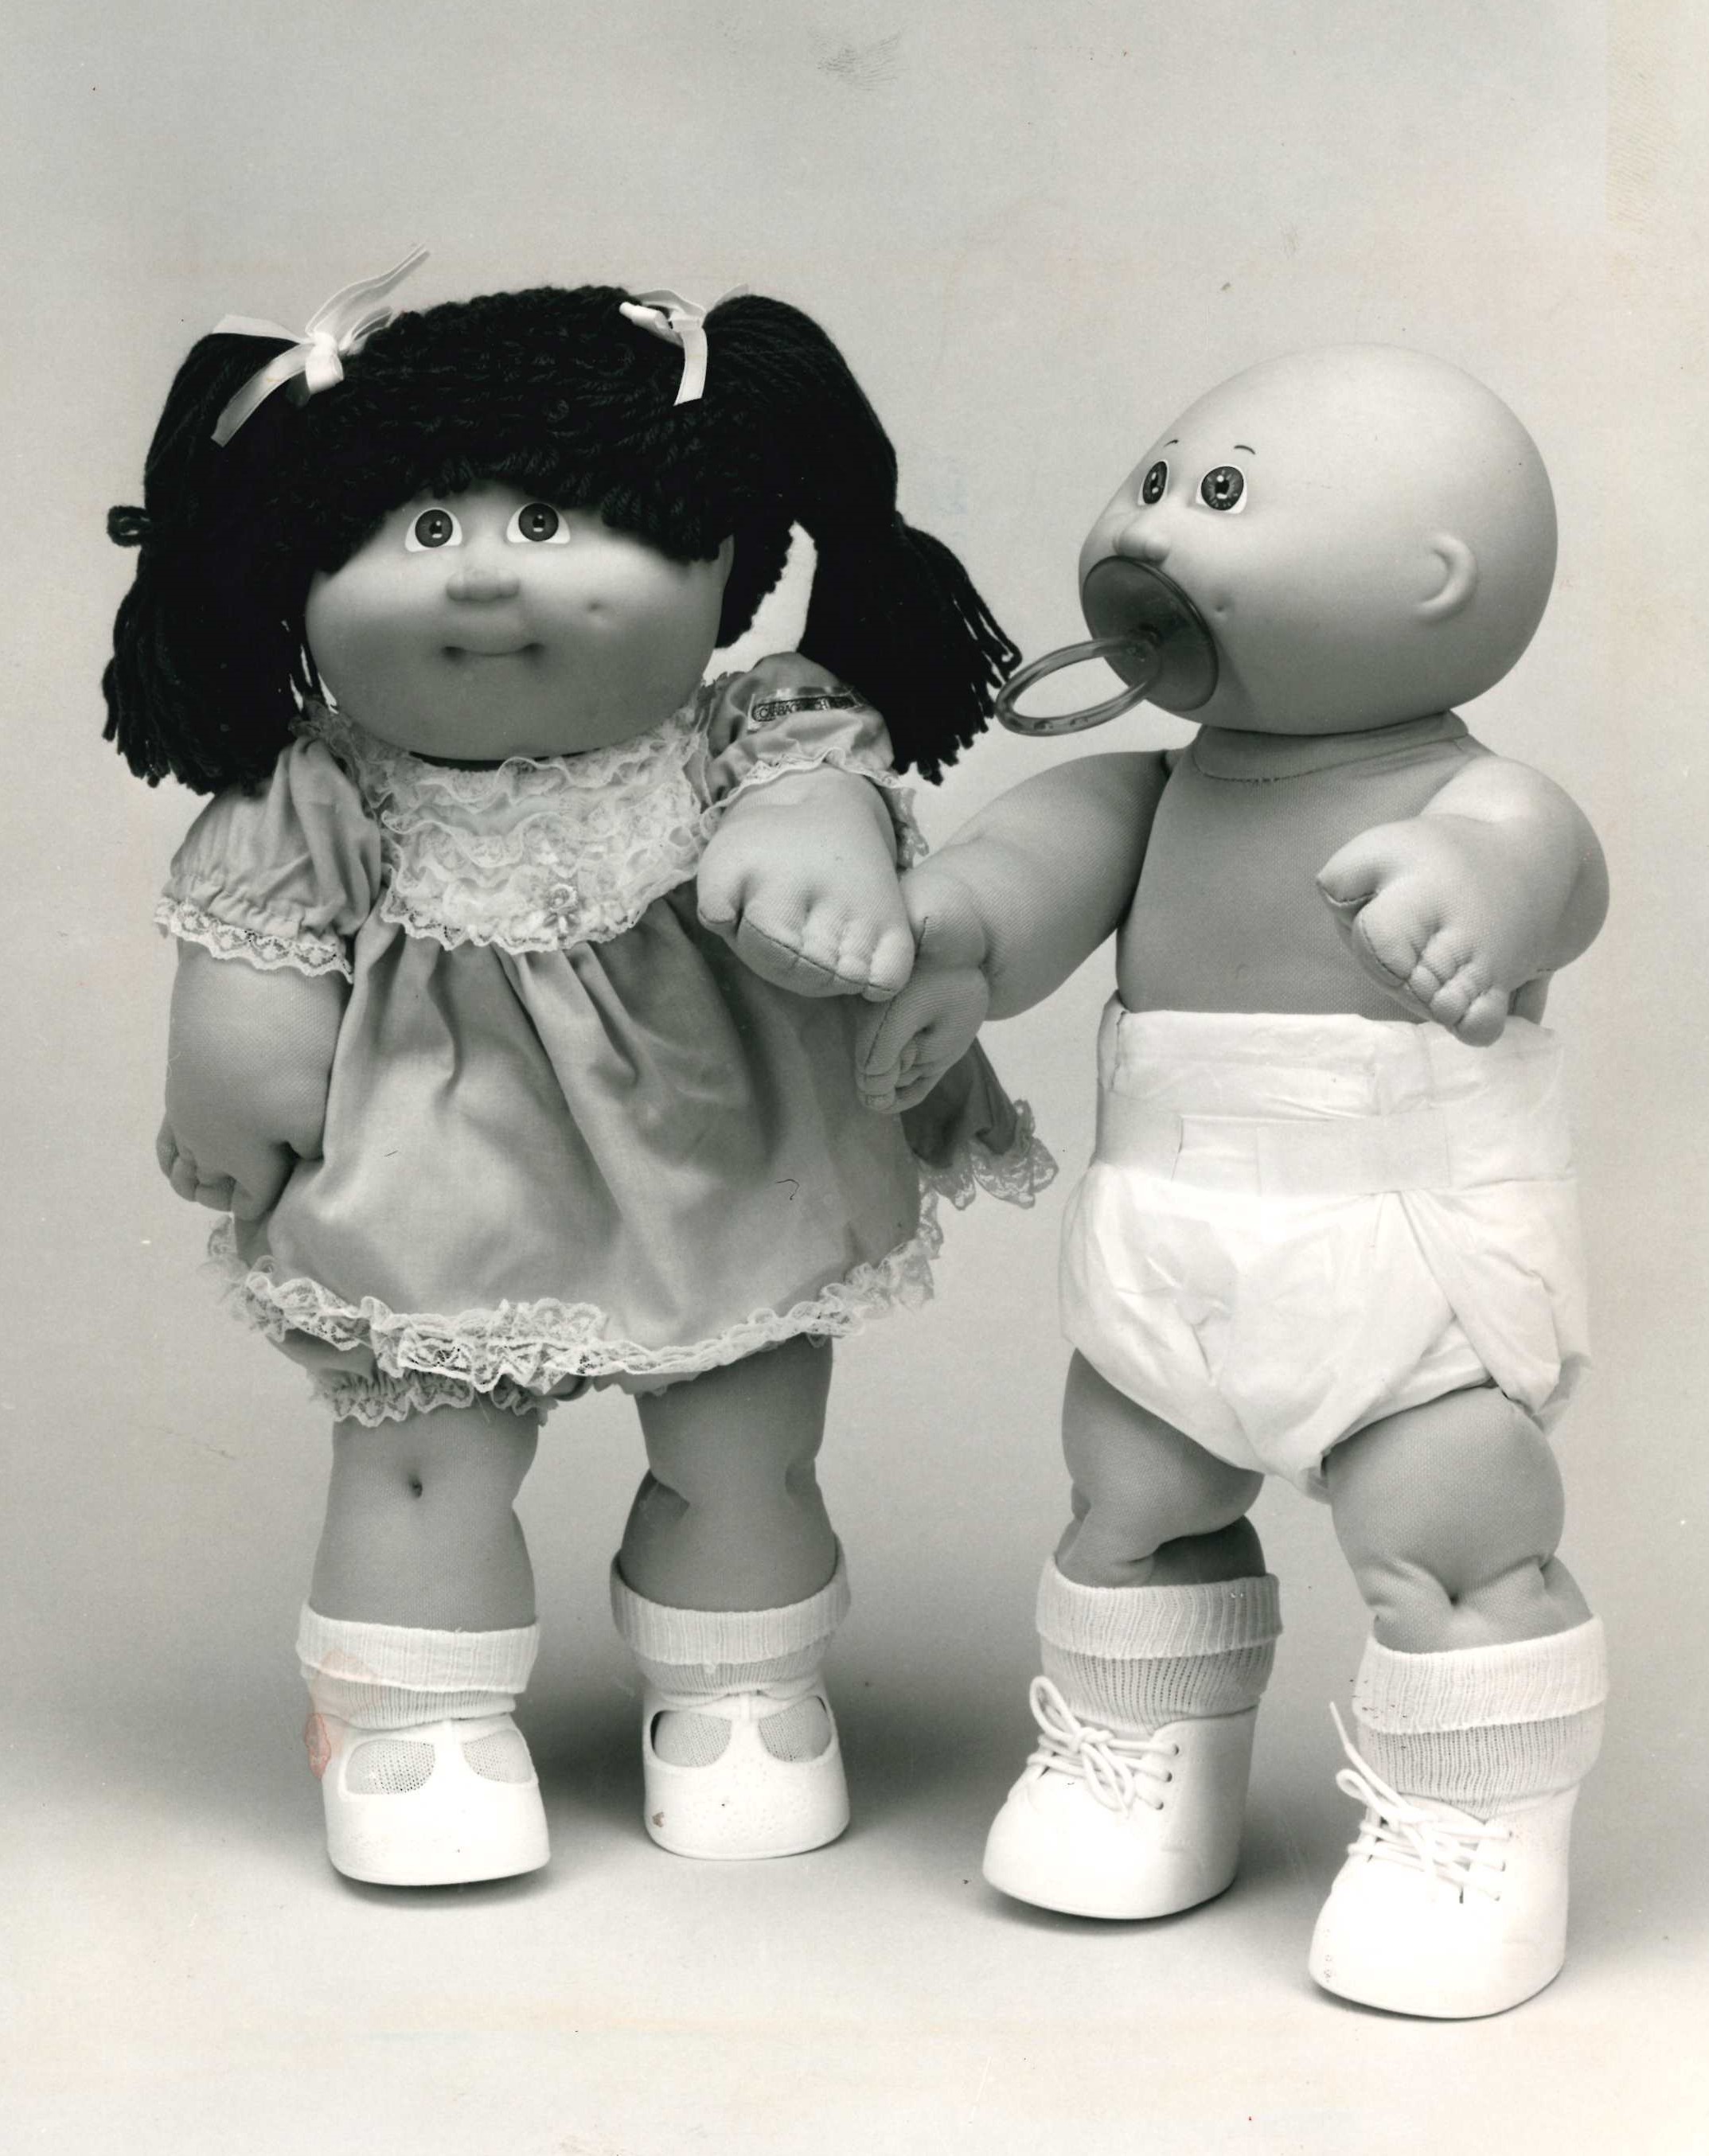 Sensation of the season in 1985, Cabbage Patch dolls